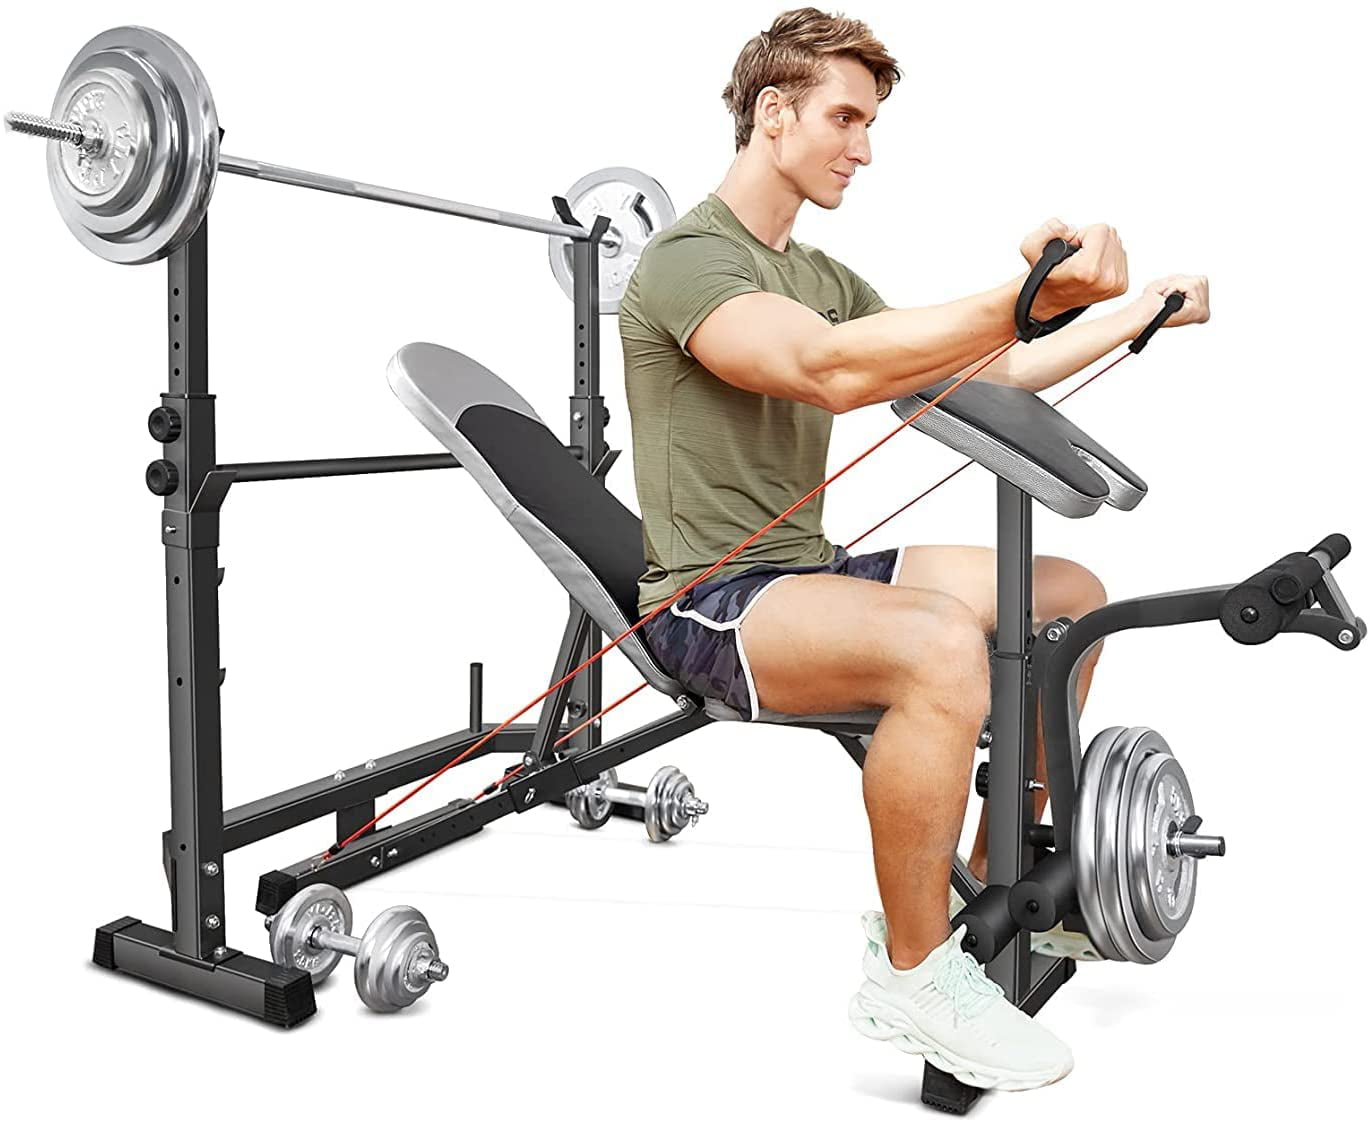 Adjustable Olympic Workout Weight Lifting Bench w/ Rack Incline Decline Flat Gym 